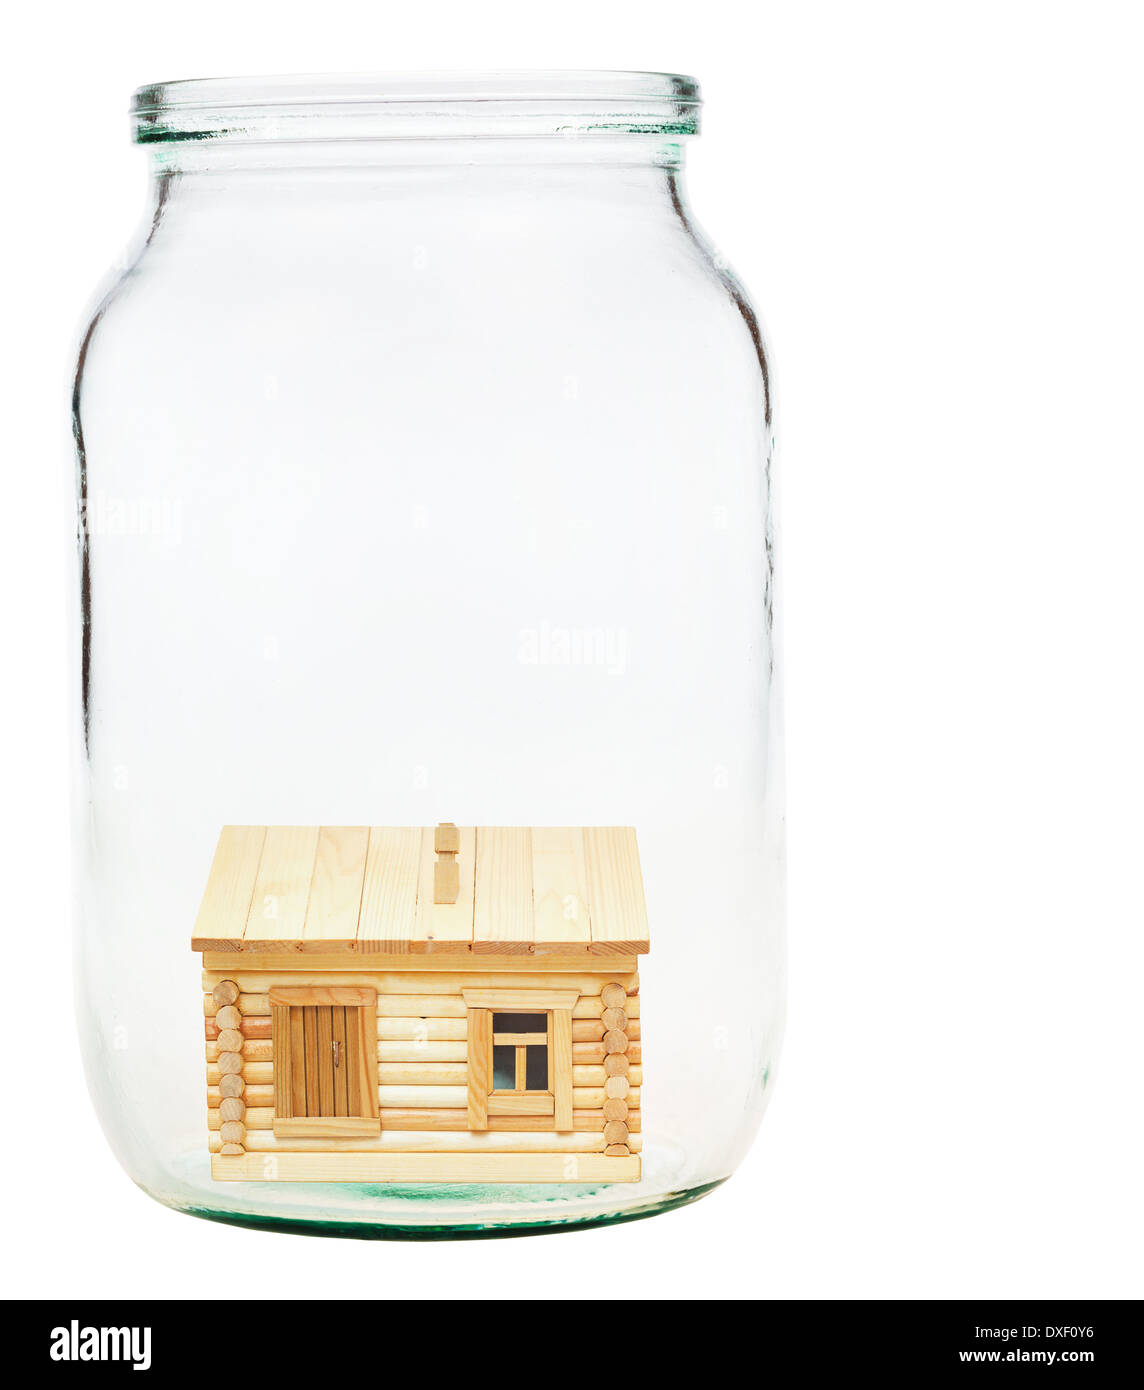 new wooden village house in open glass jar Stock Photo